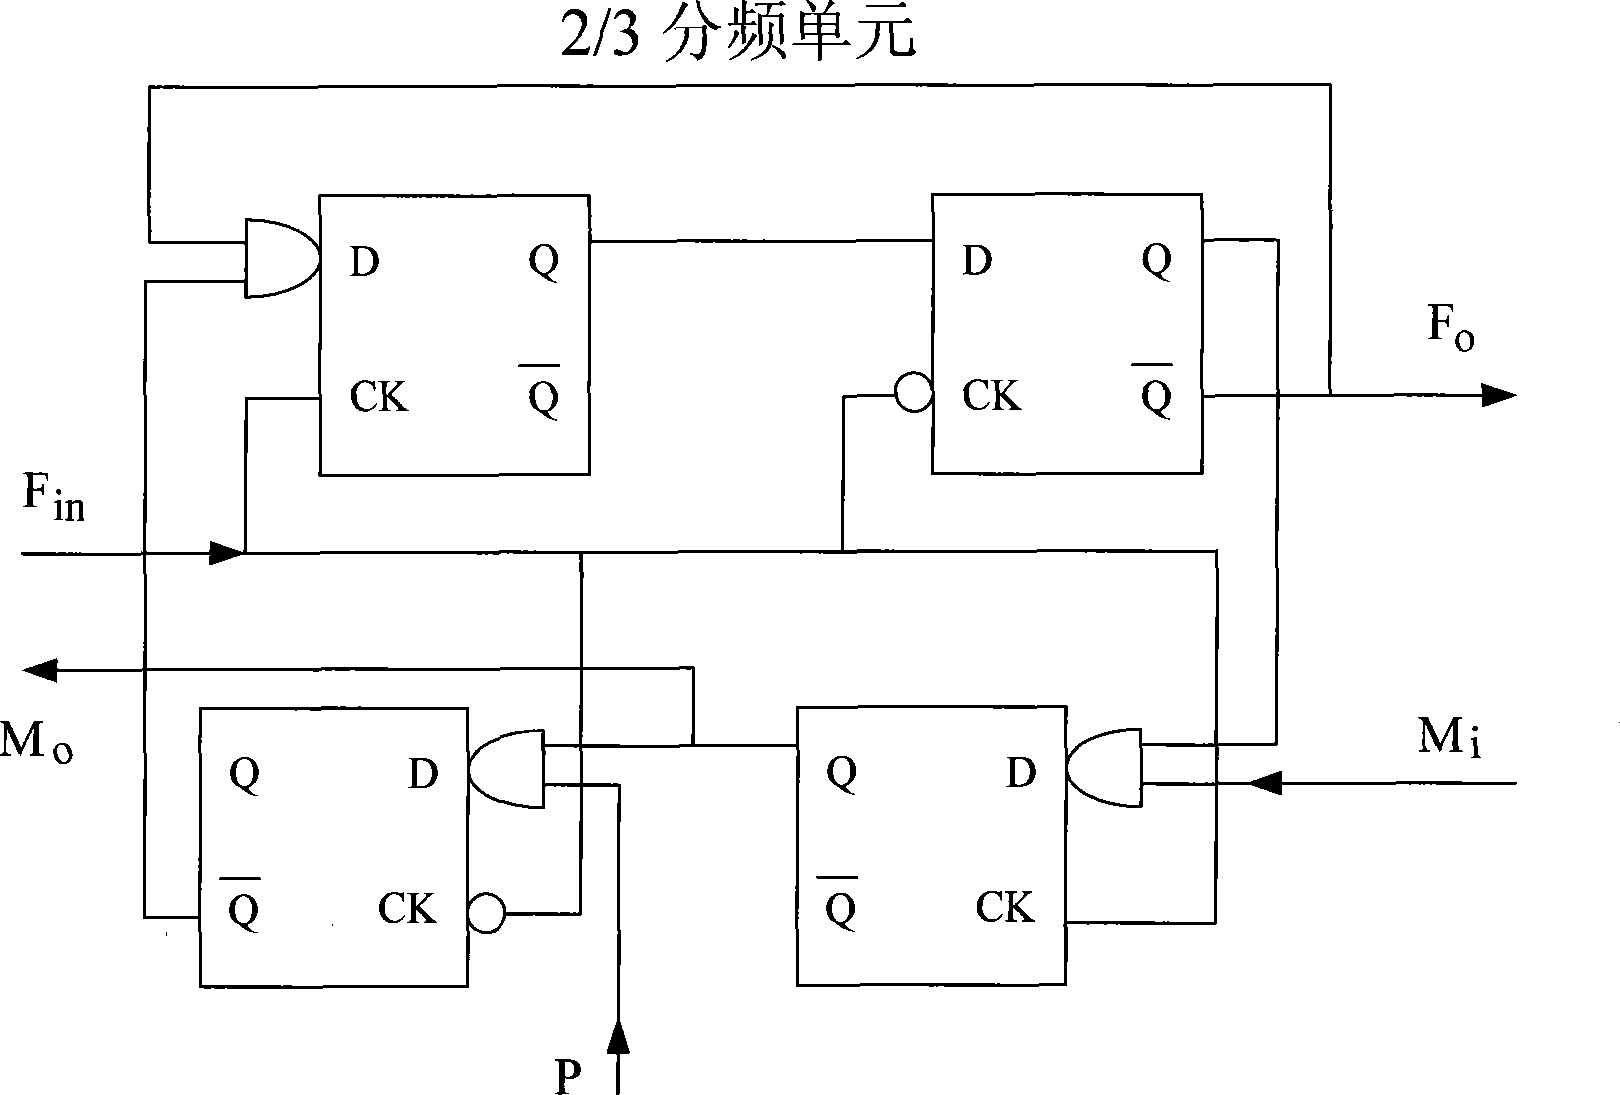 Multi-mode programmable frequency divider with 0.5 frequency division step